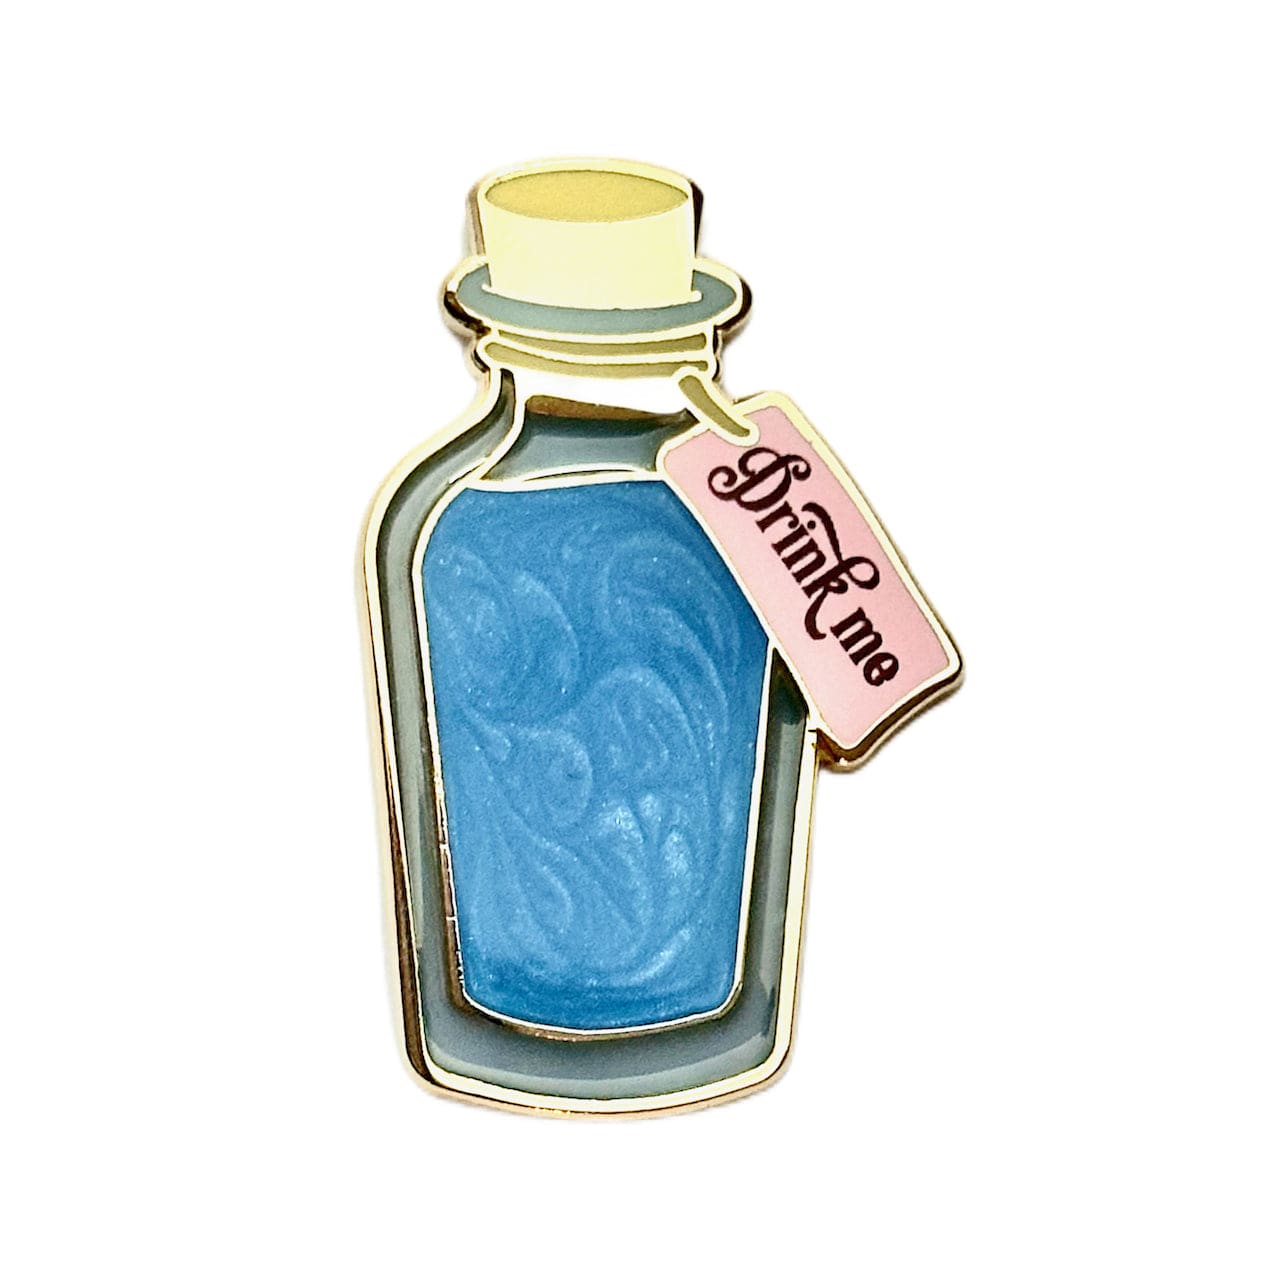 Pinbuds Enamel pin Drink me potion pin from Alice in wonderland (stainglass & pearlescent)